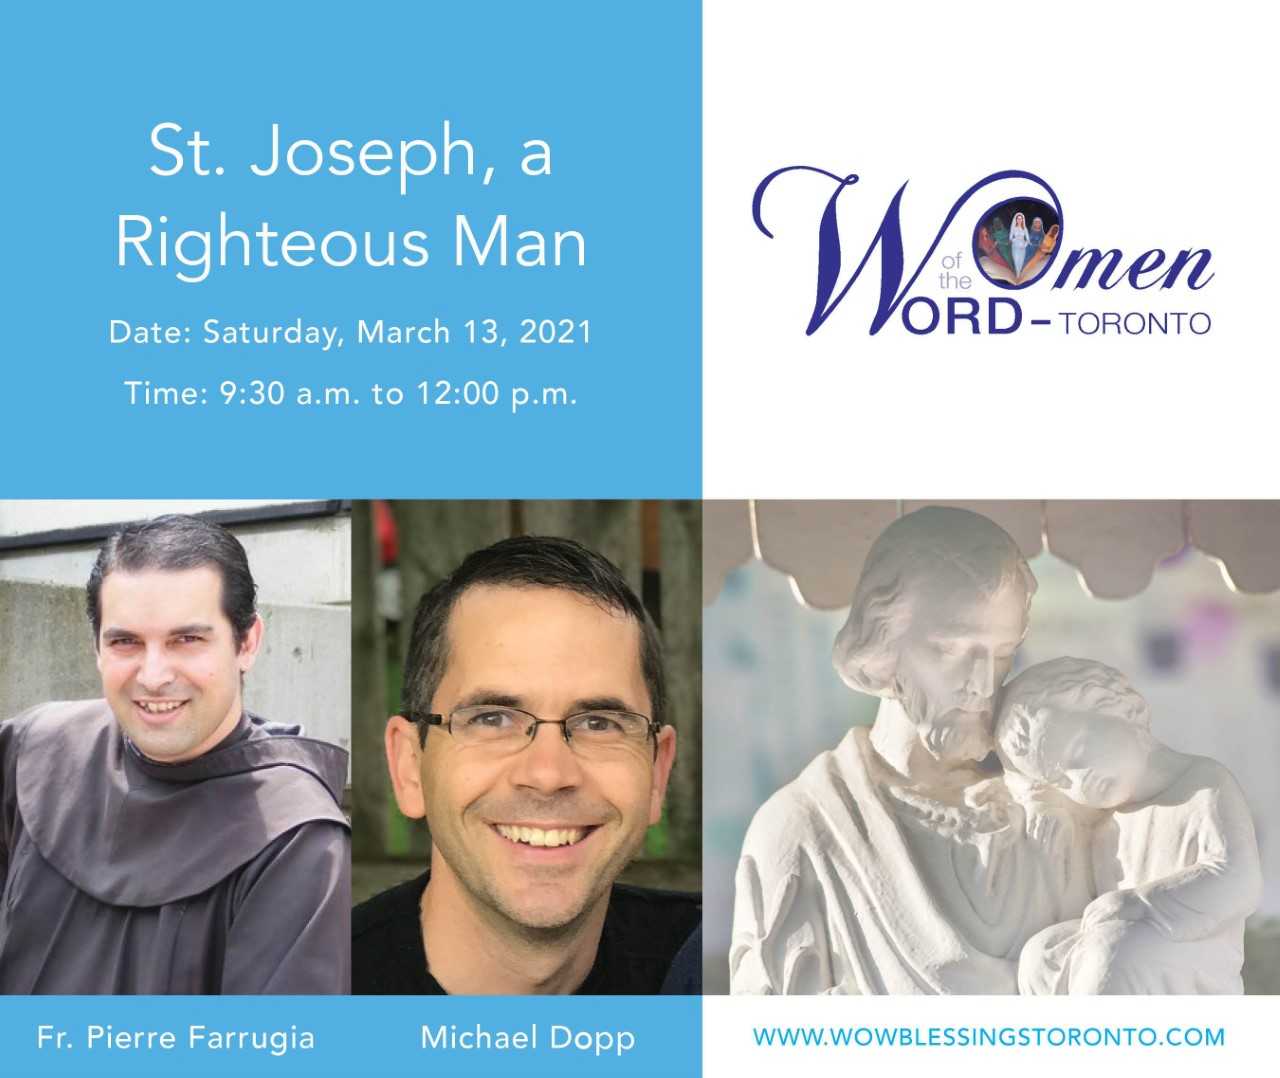 Women of the Word  event on "St. Joseph, a Righteous Man"